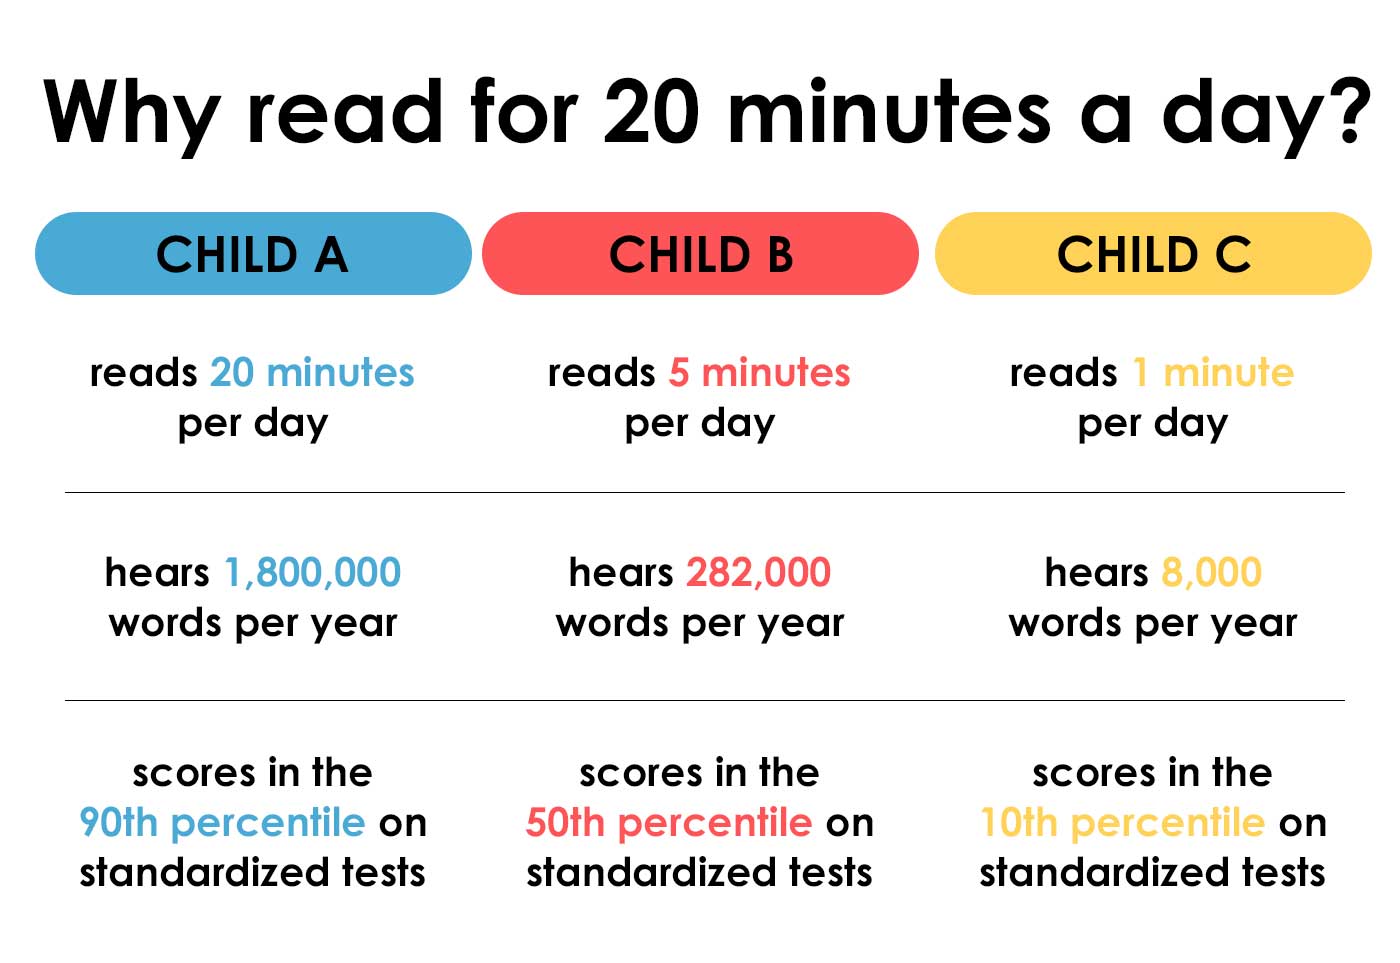 Why Read for 20 Minutes a Day?